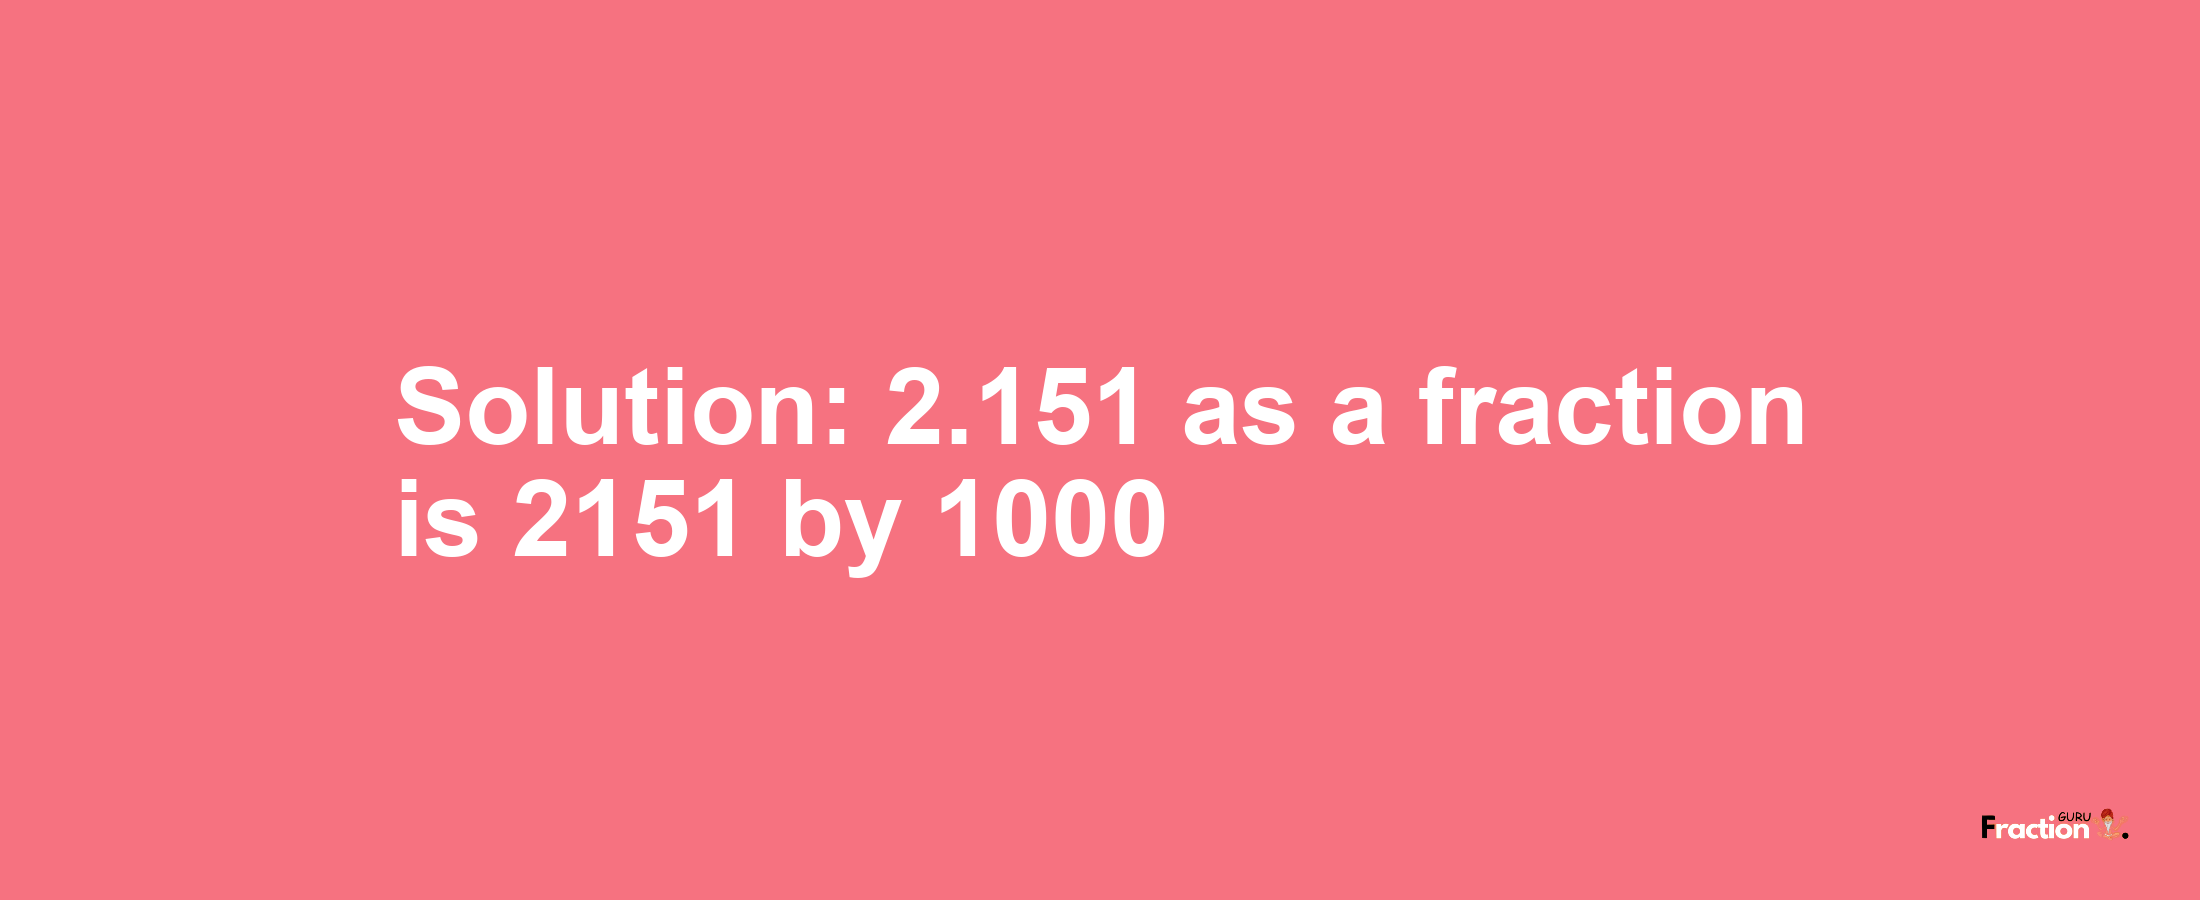 Solution:2.151 as a fraction is 2151/1000